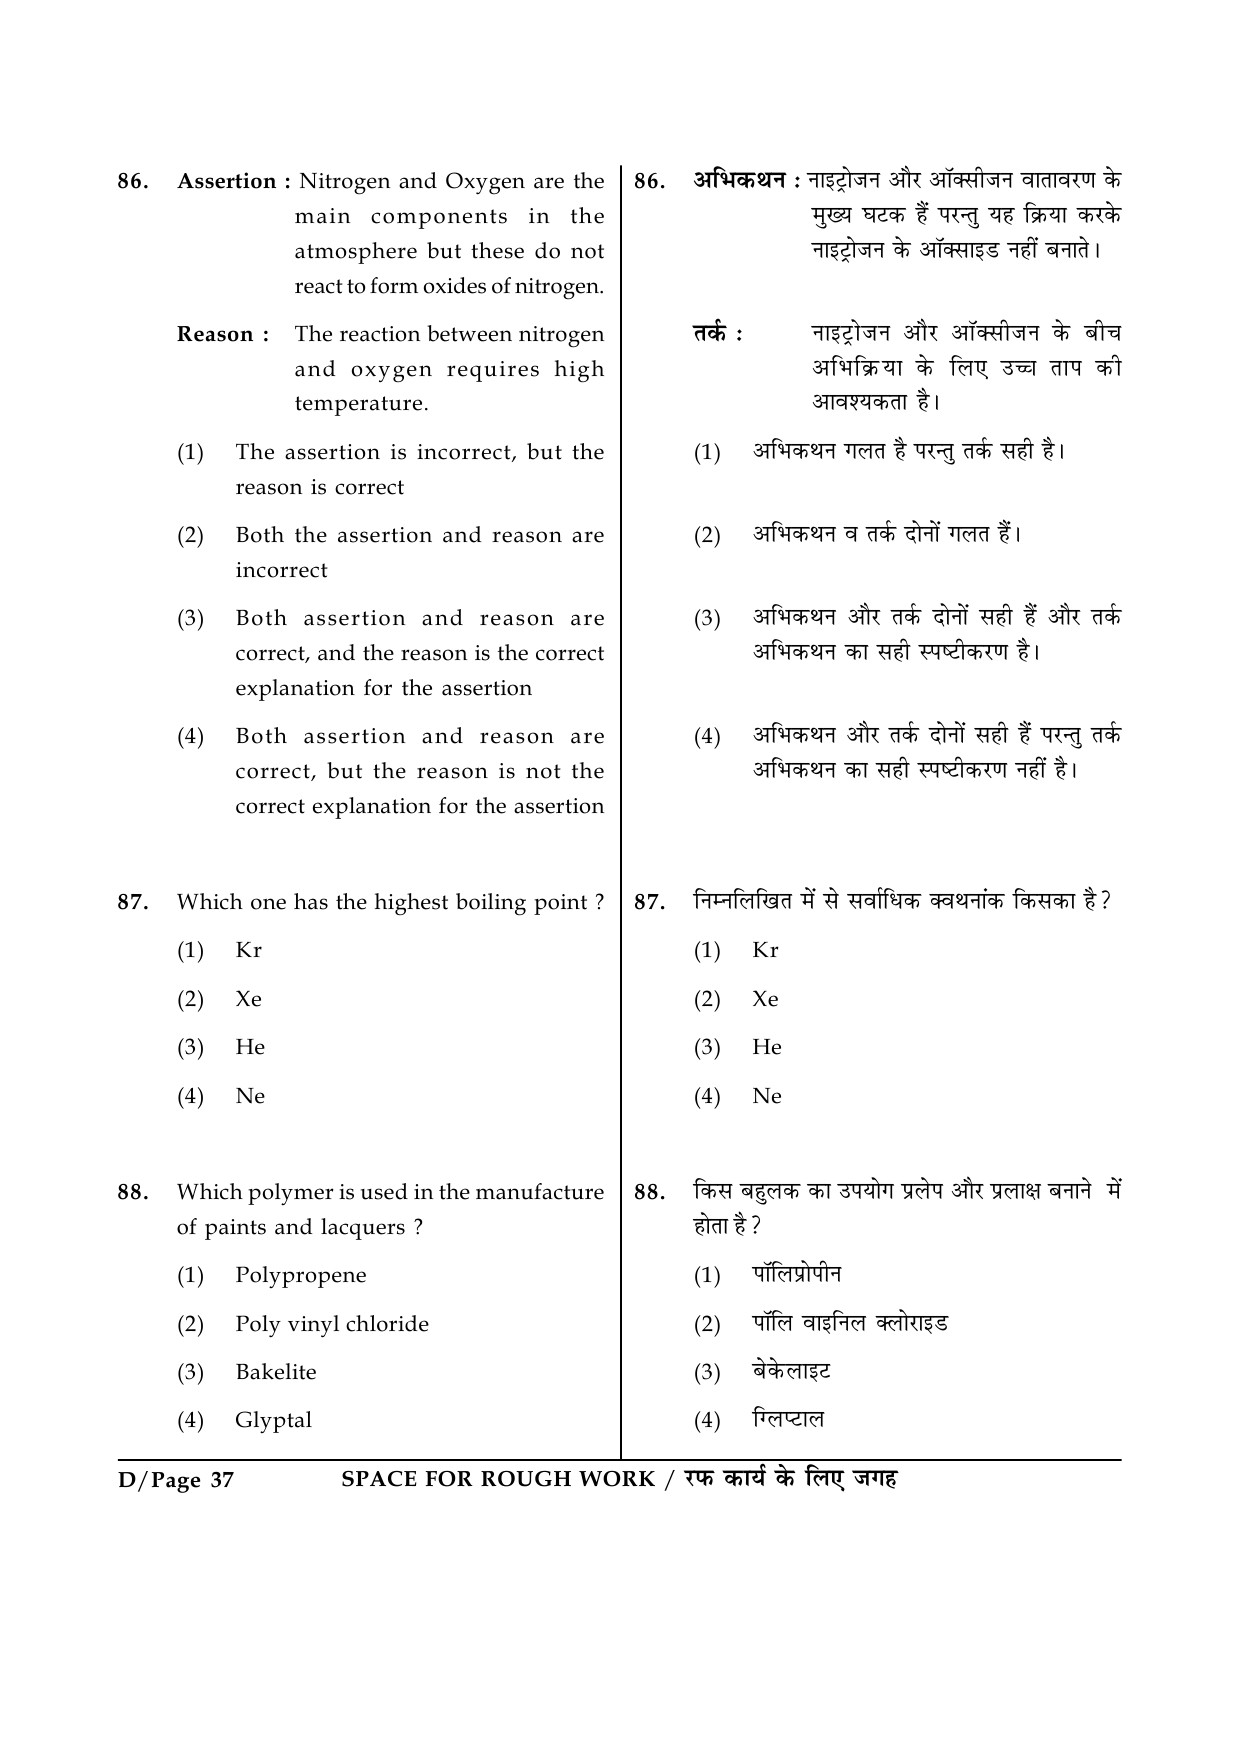 JEE Main Exam Question Paper 2015 Booklet D 37